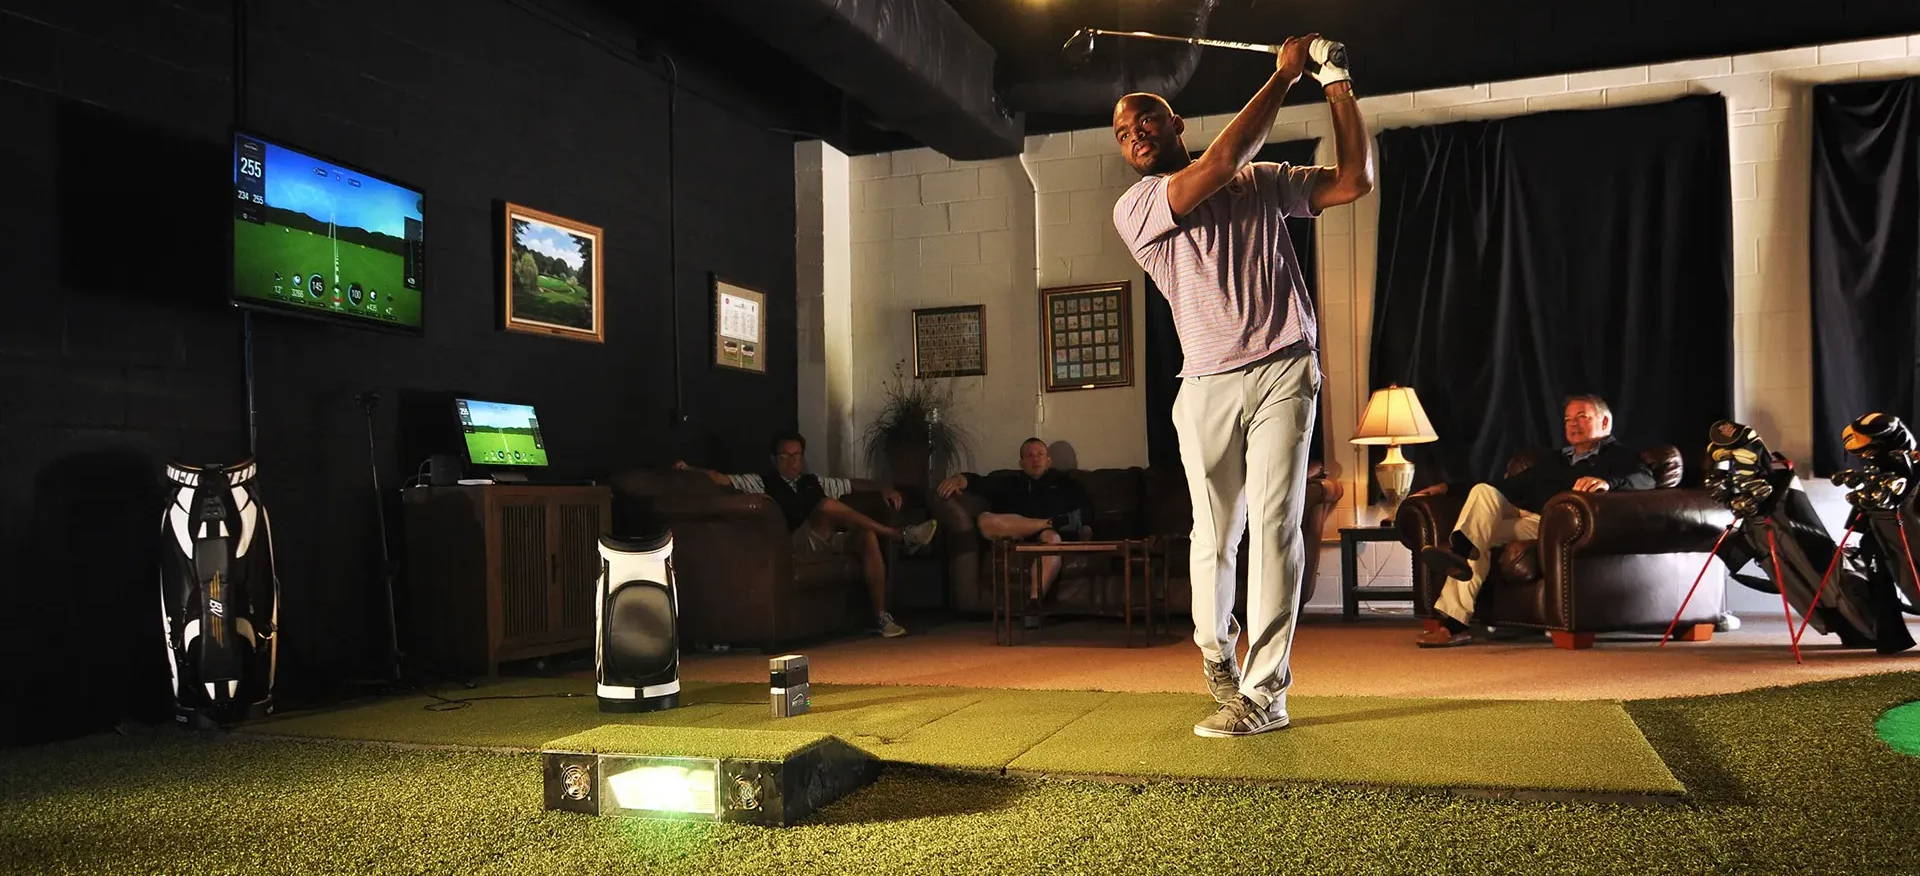 A golfer swinging in a home golf simulator with the SkyTrak and 3 other men sitting and watching in the background